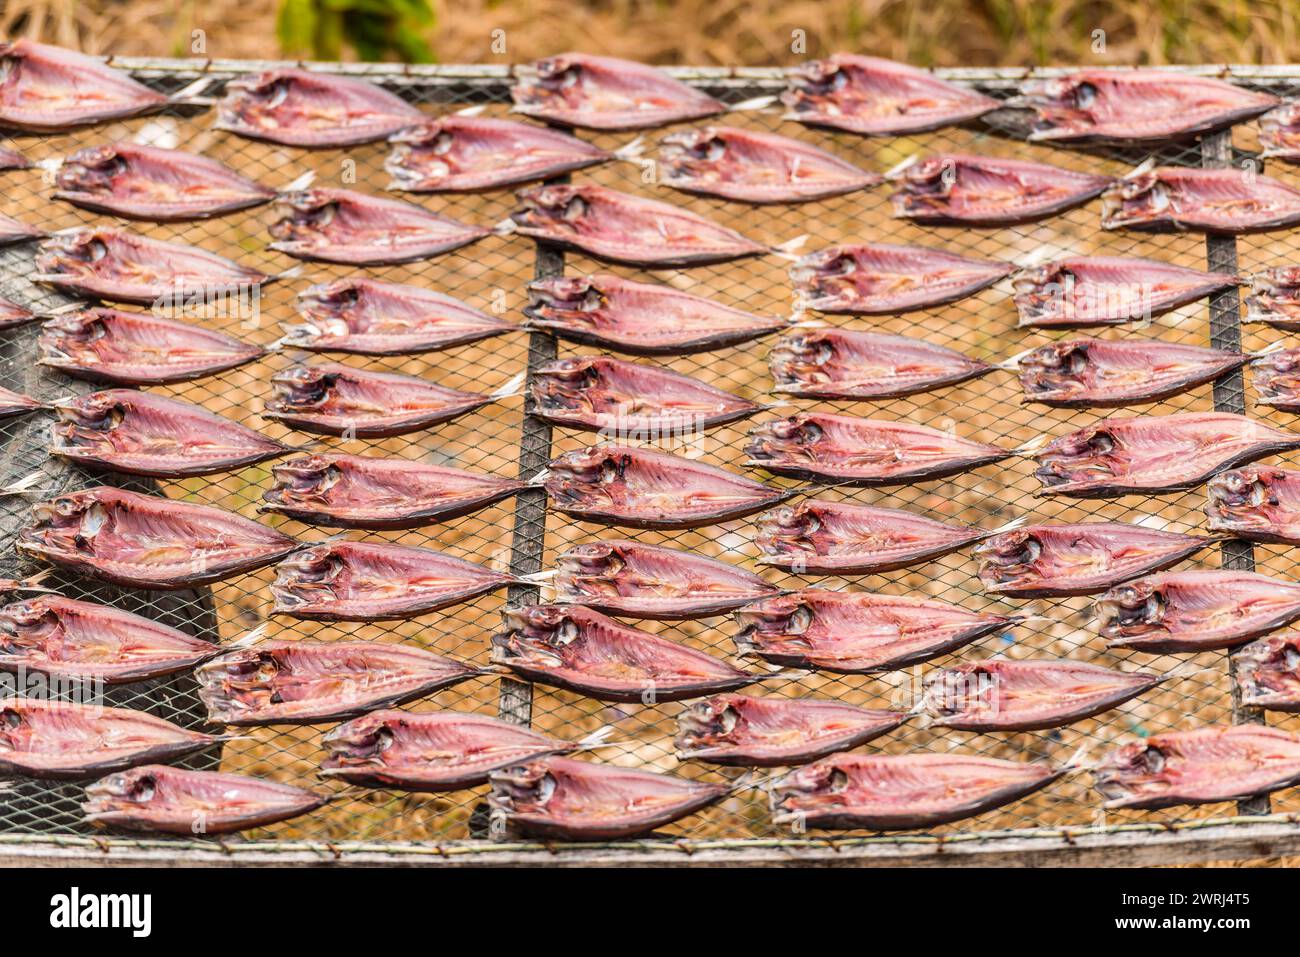 Mackerel drying in the sun, fish, drying, sun, tradition, traditional, dried, dried, salt, salted, preservation, food, nutrition, Asian, shelf life Stock Photo